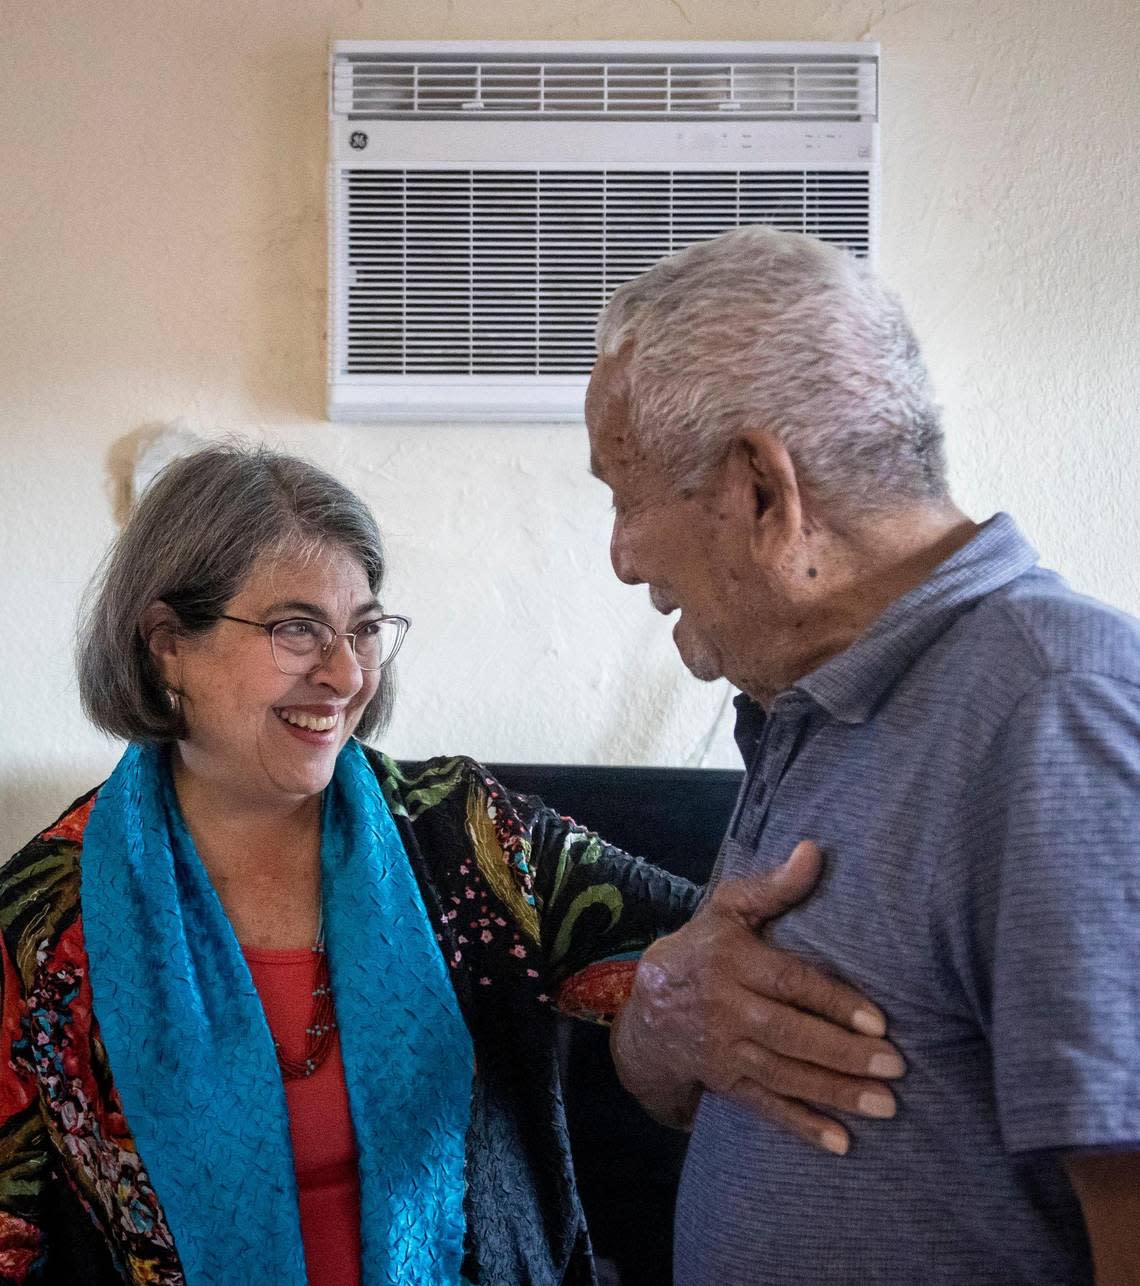 Miami-Dade County Mayor Daniella Levine Cava spoke to 86-year-old Julio Banegas, right, in Miami on Nov. 28 inside his apartment as the county began installing air-conditioning units in public housing.